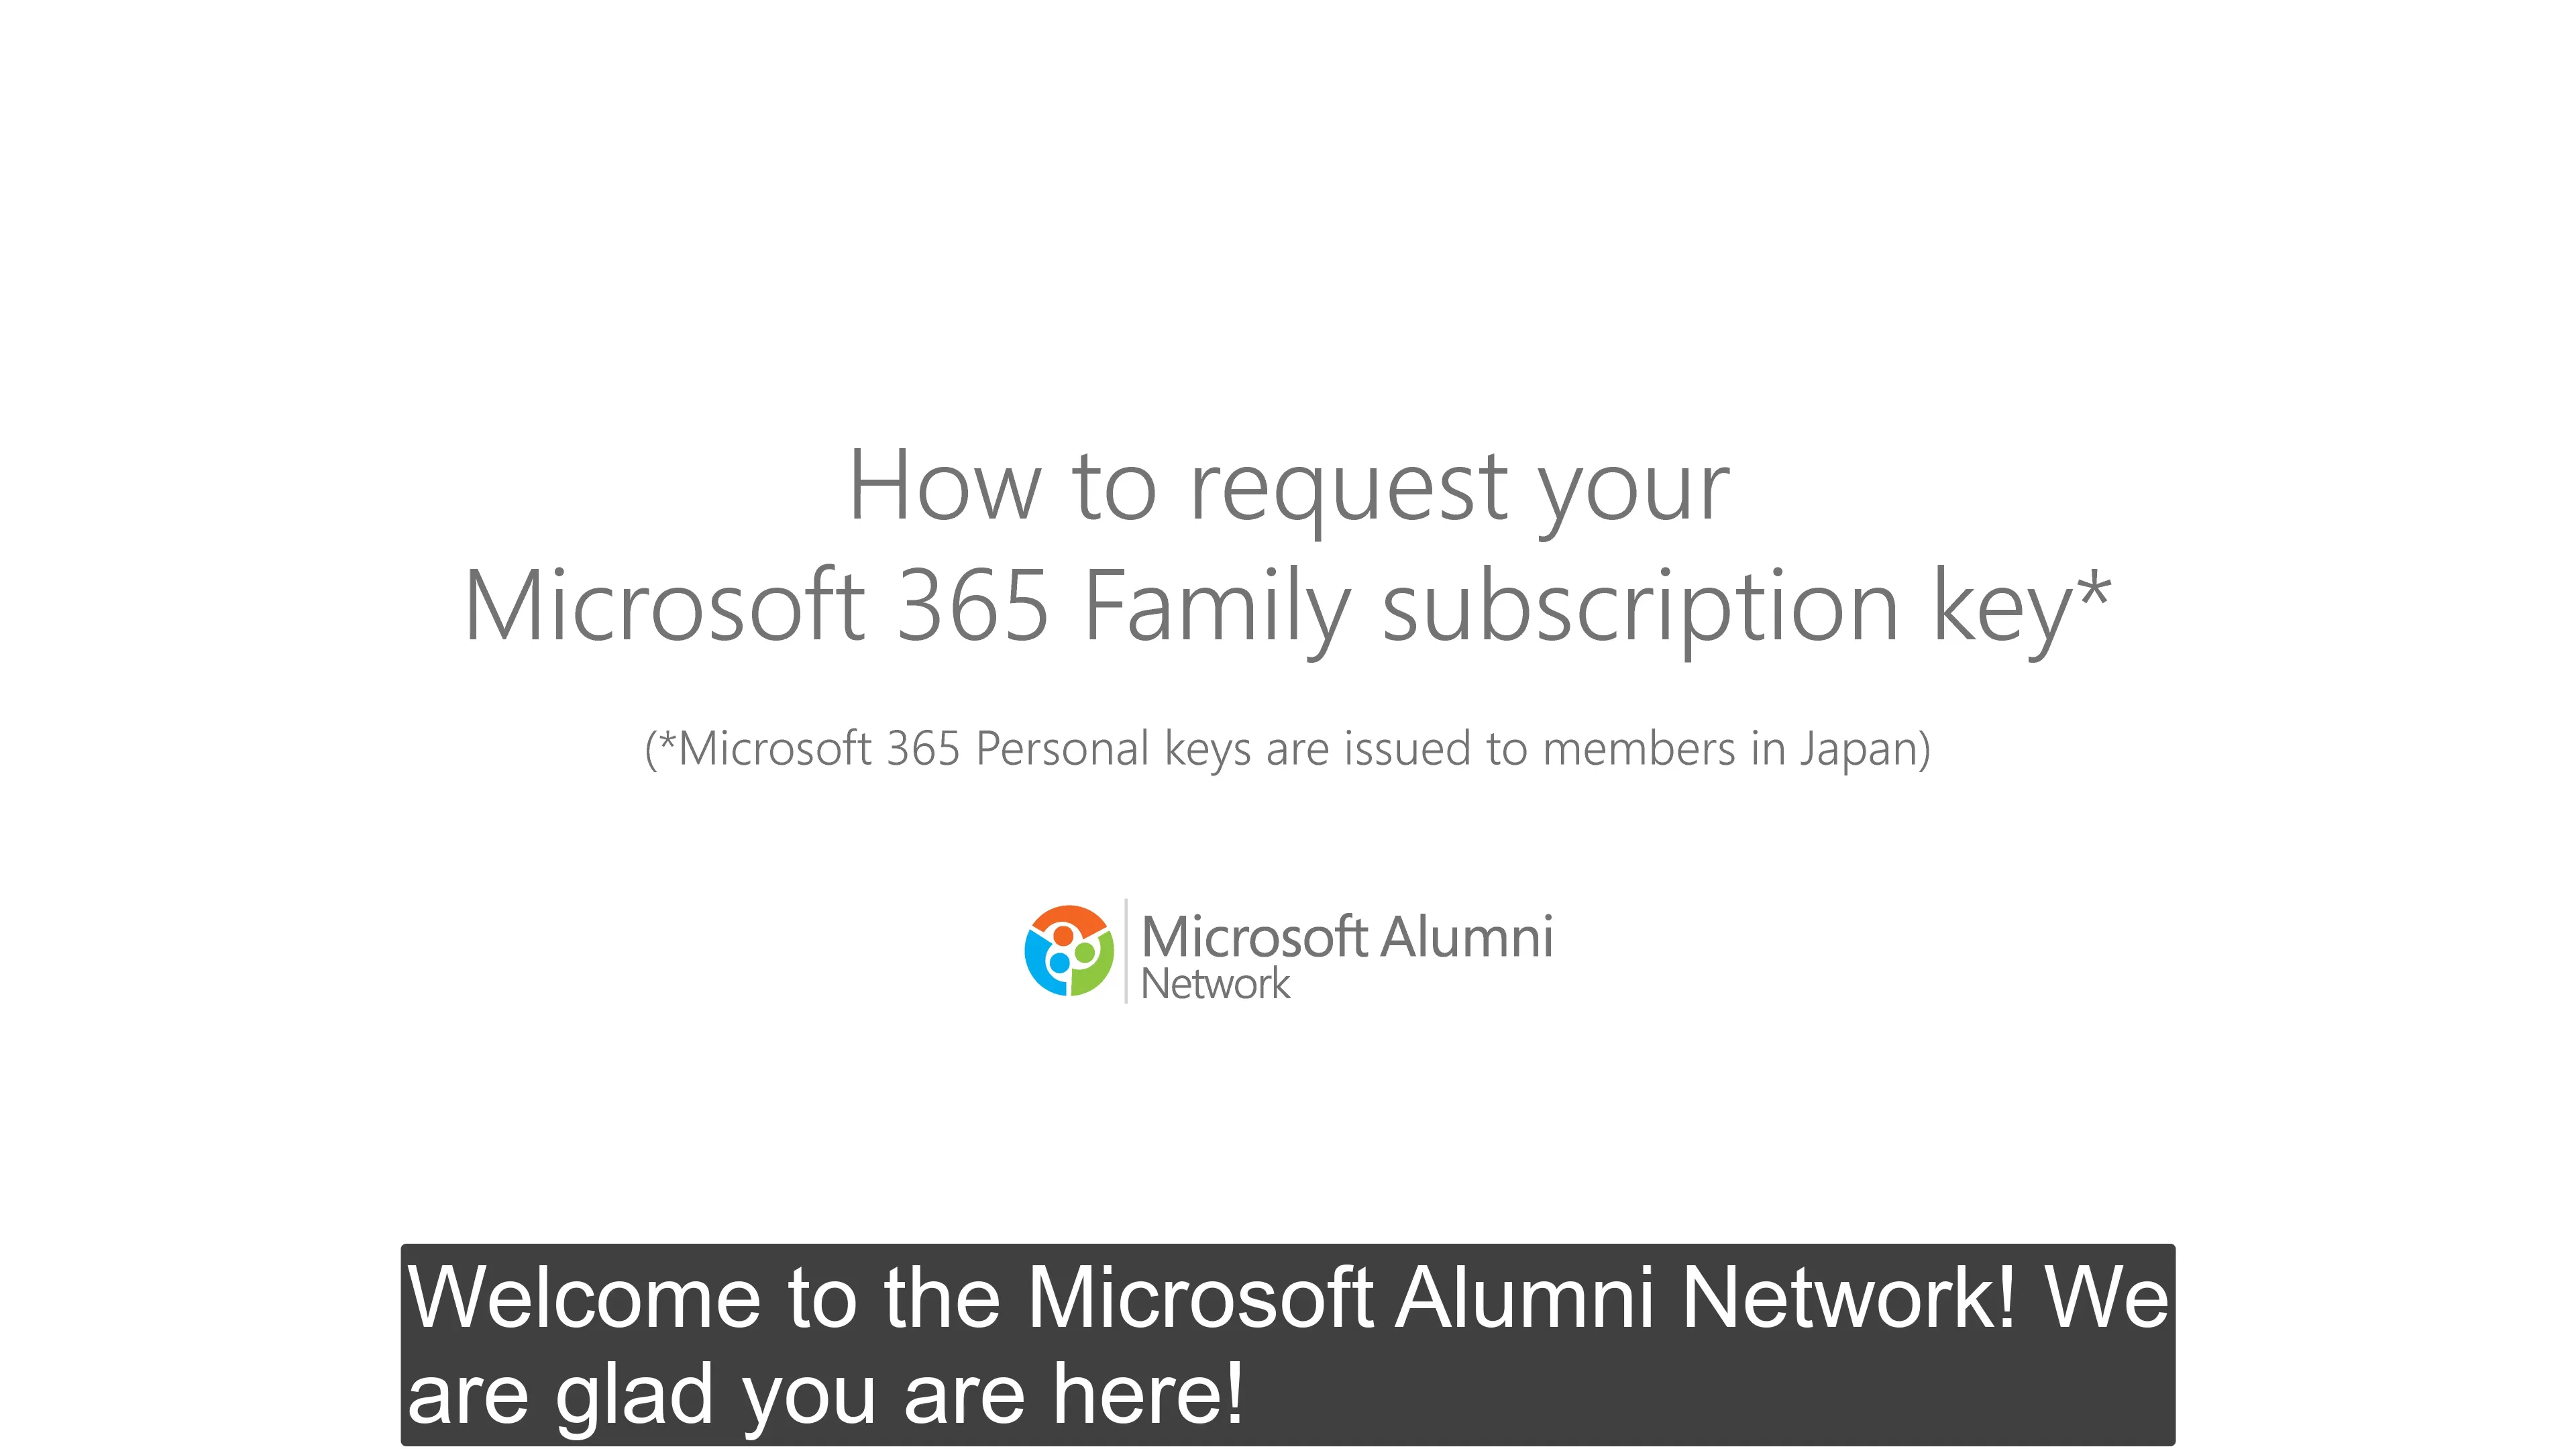 How to Request Your Microsoft 365 Family Key on Vimeo